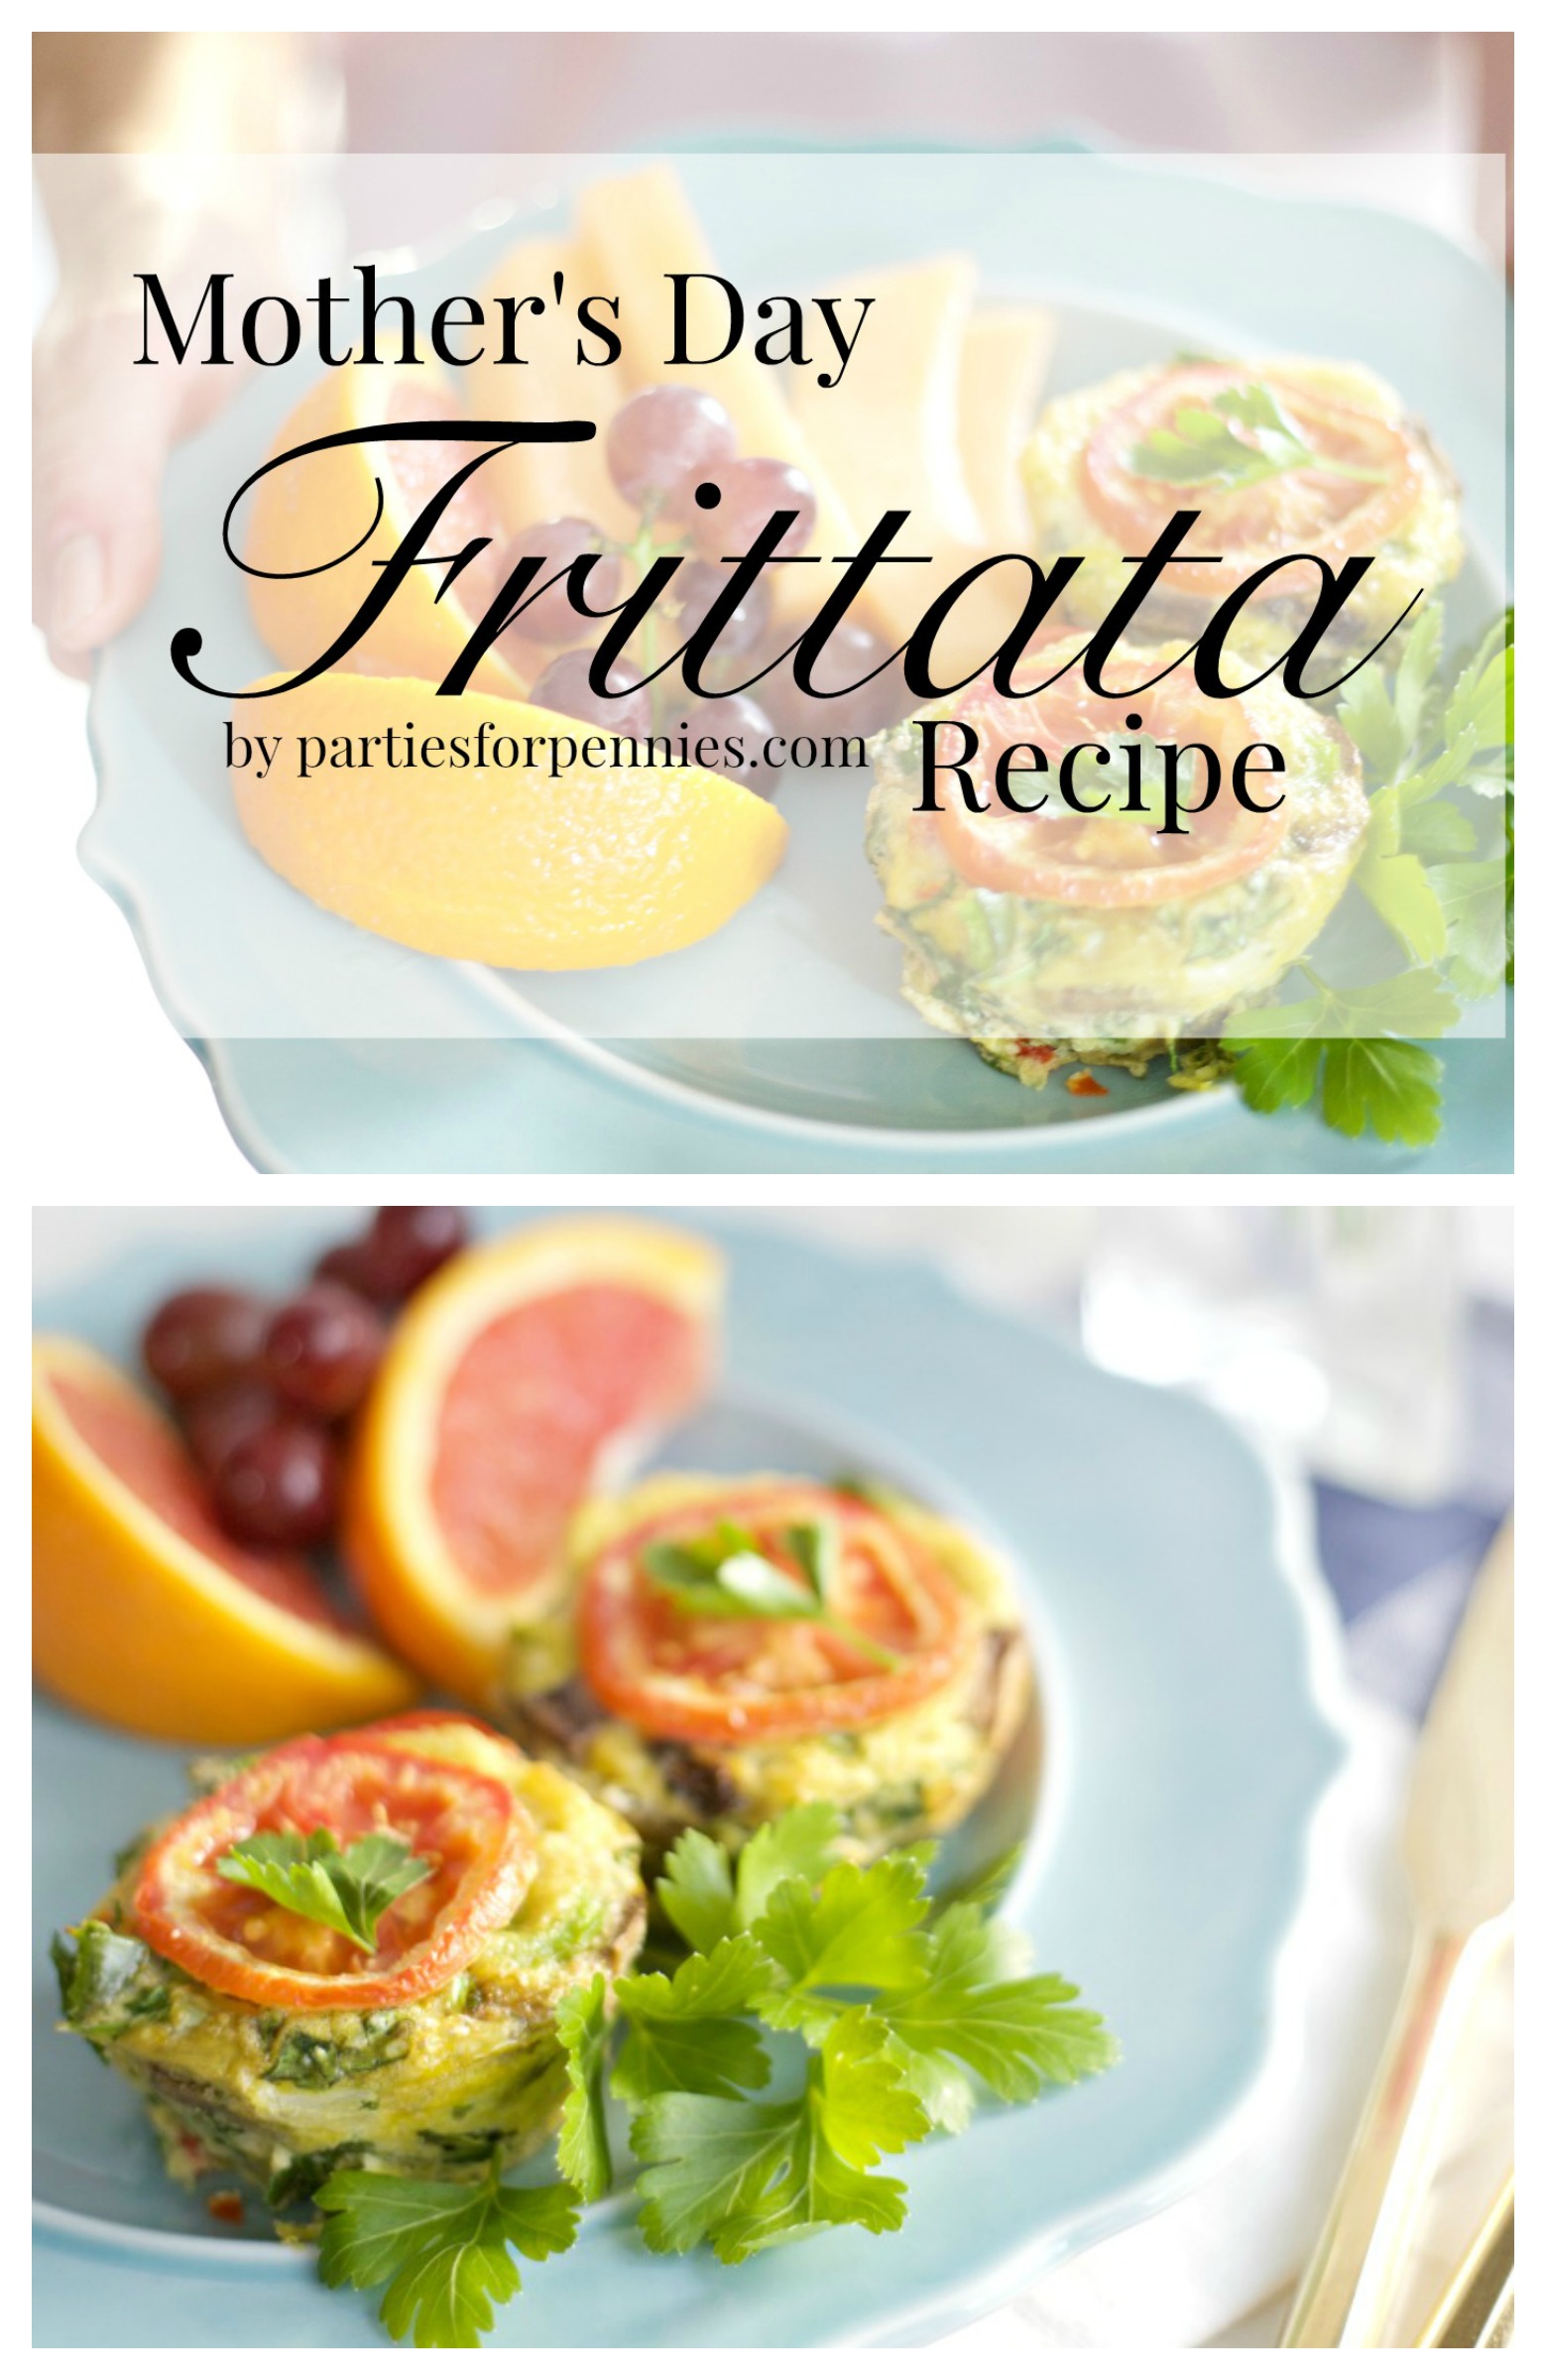 Easy Frittata Recipe for Mother's Day by PartiesforPennies.com | Perfect breakfast or brunch recipe! Great for a bridal shower, baby shower, or bridal brunch! 